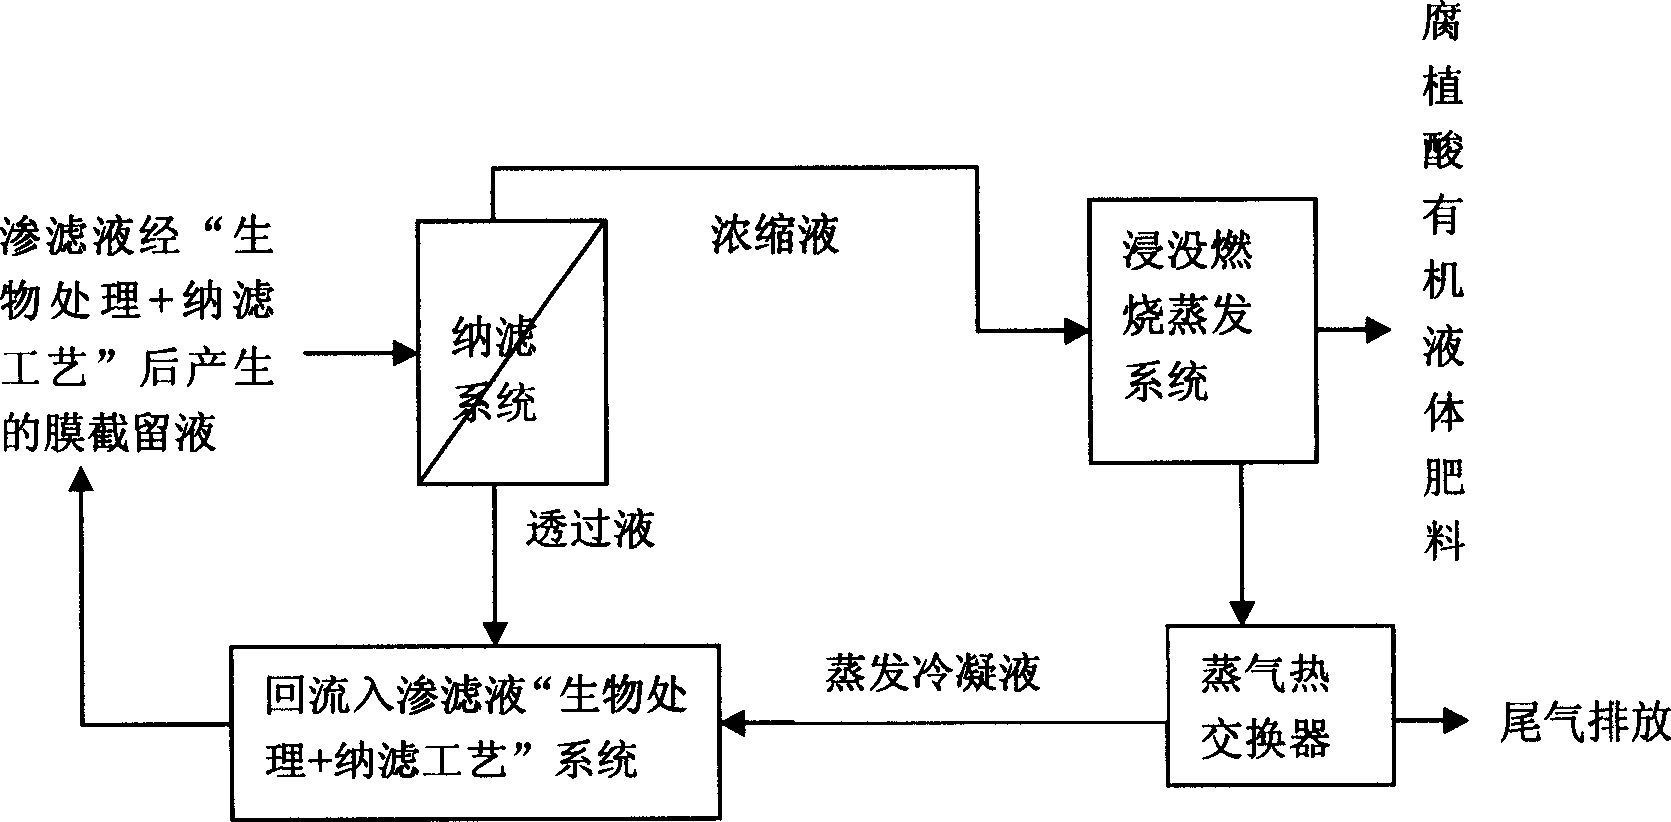 Resource process of inflitration liquid